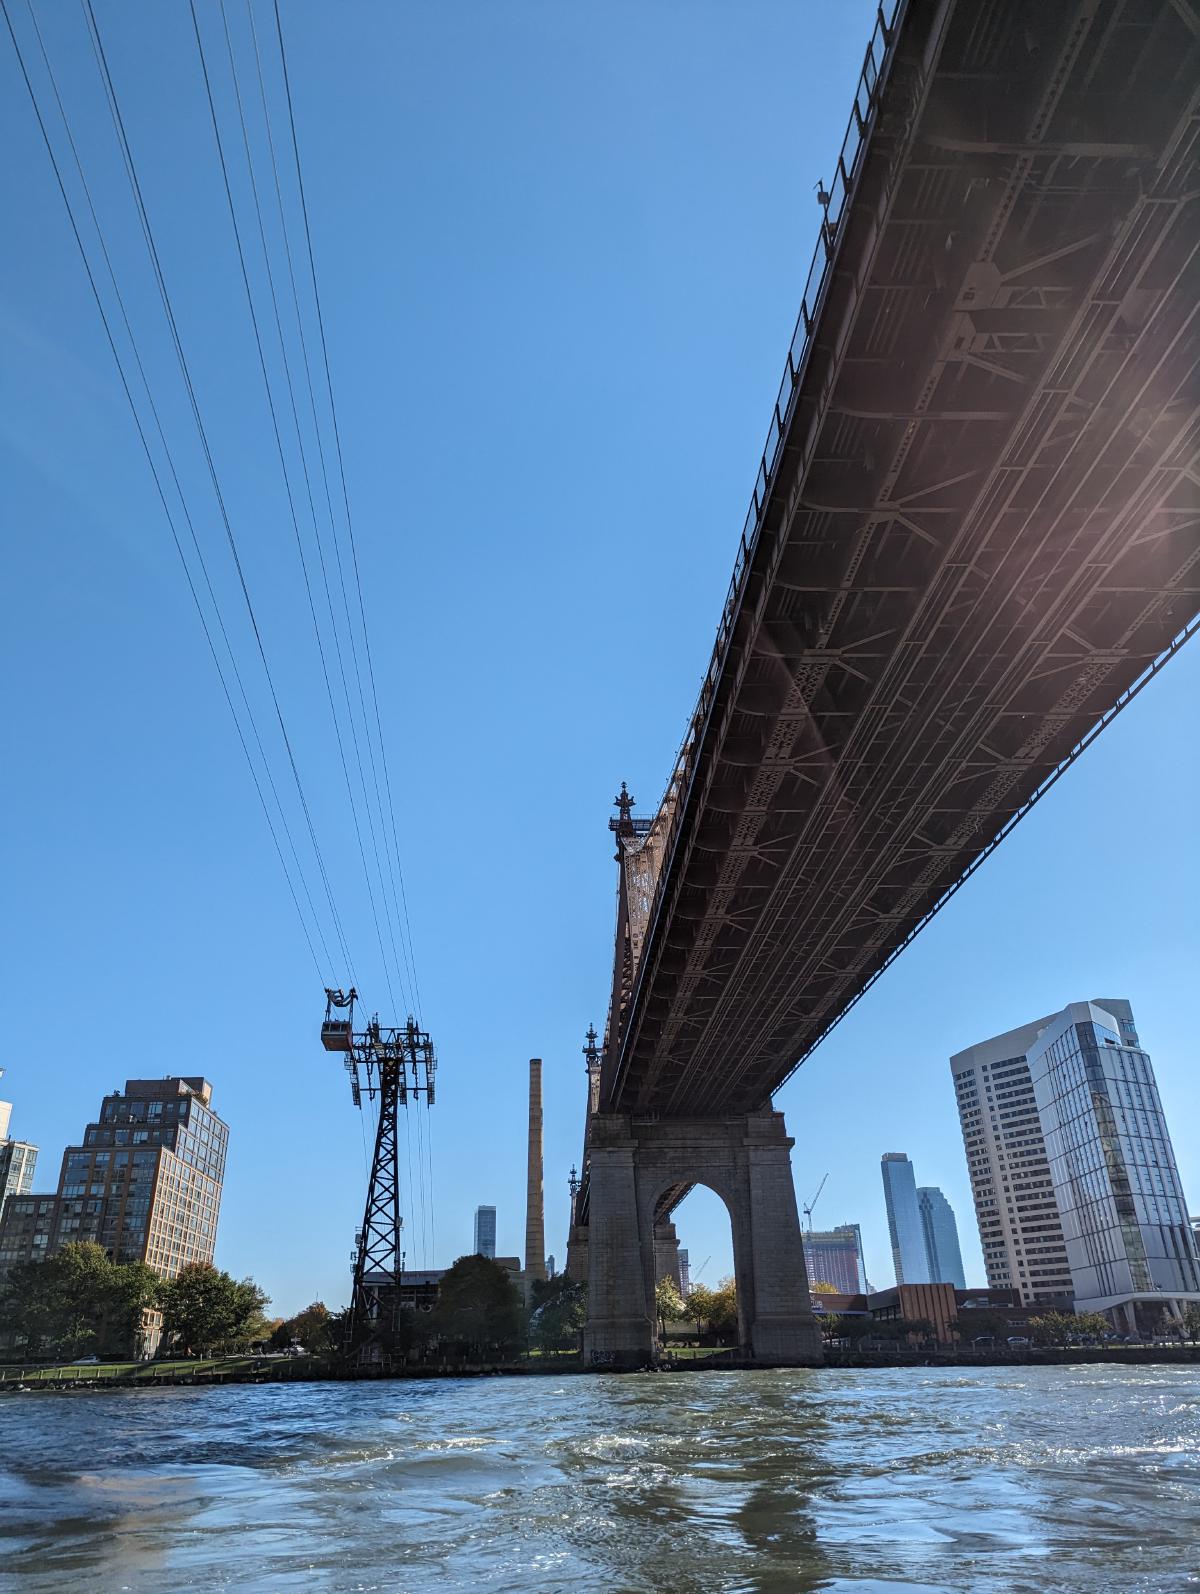 The Queensboro Bridge and the Tramway